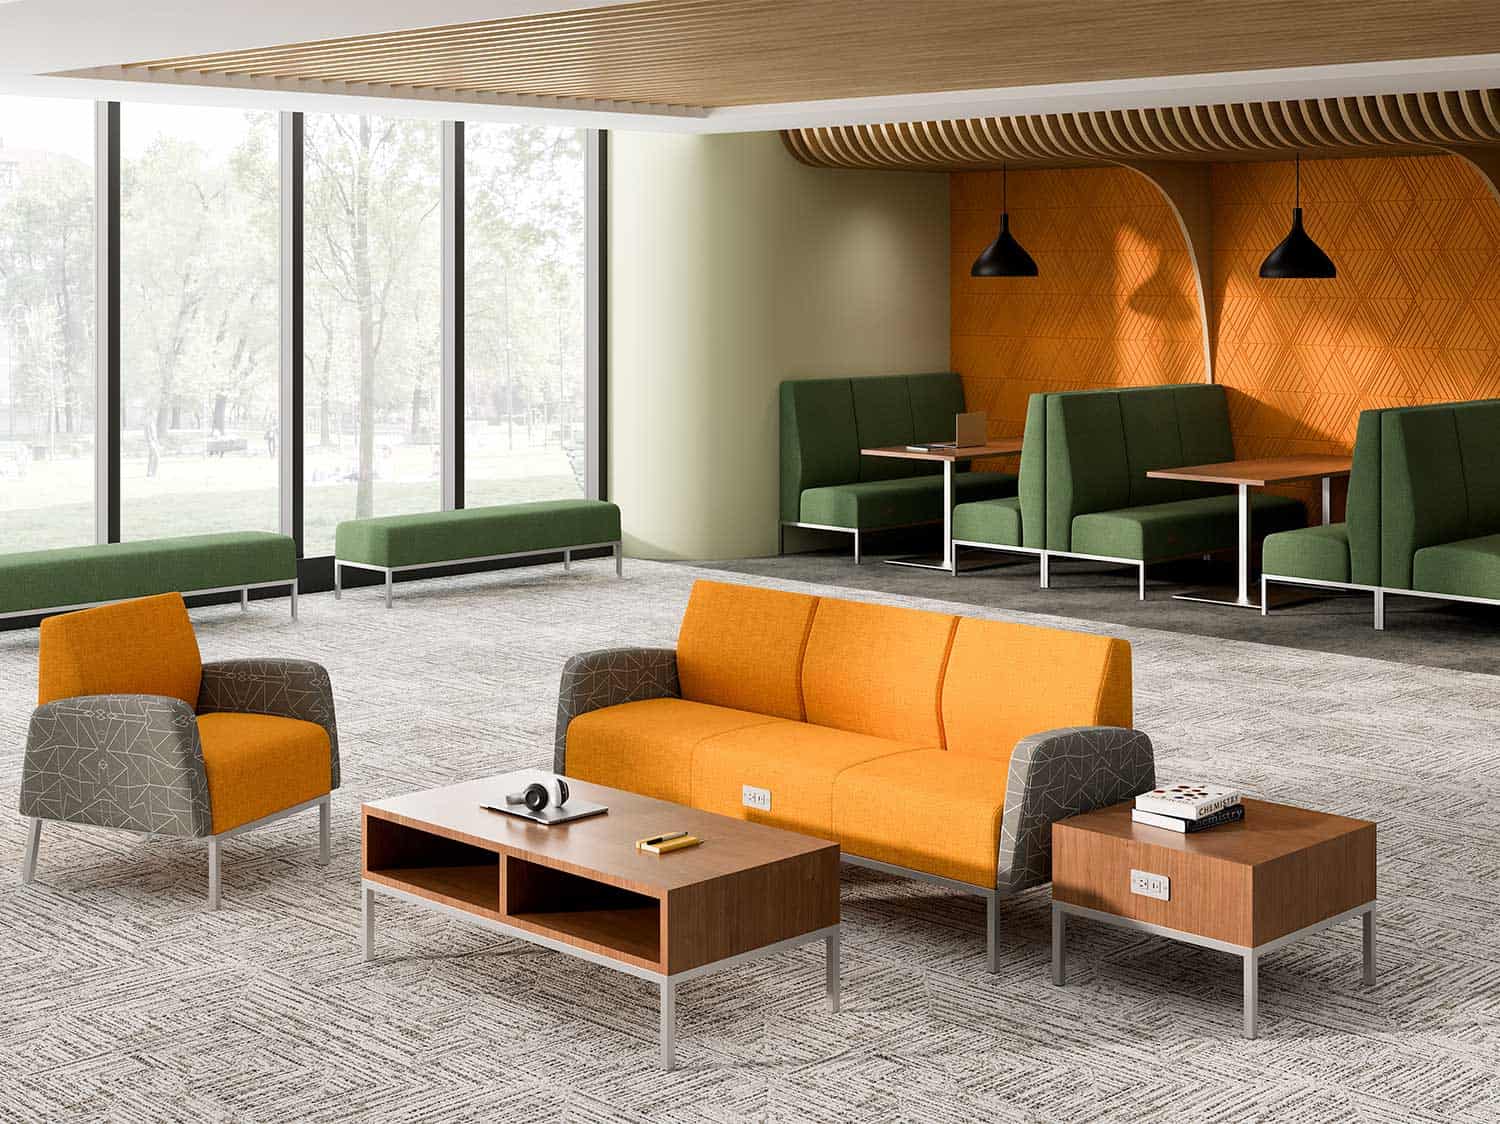 Student seating from Sauder Education including sofa, chair, benches, and high back booth and occasional tables from the Tanner Collection.